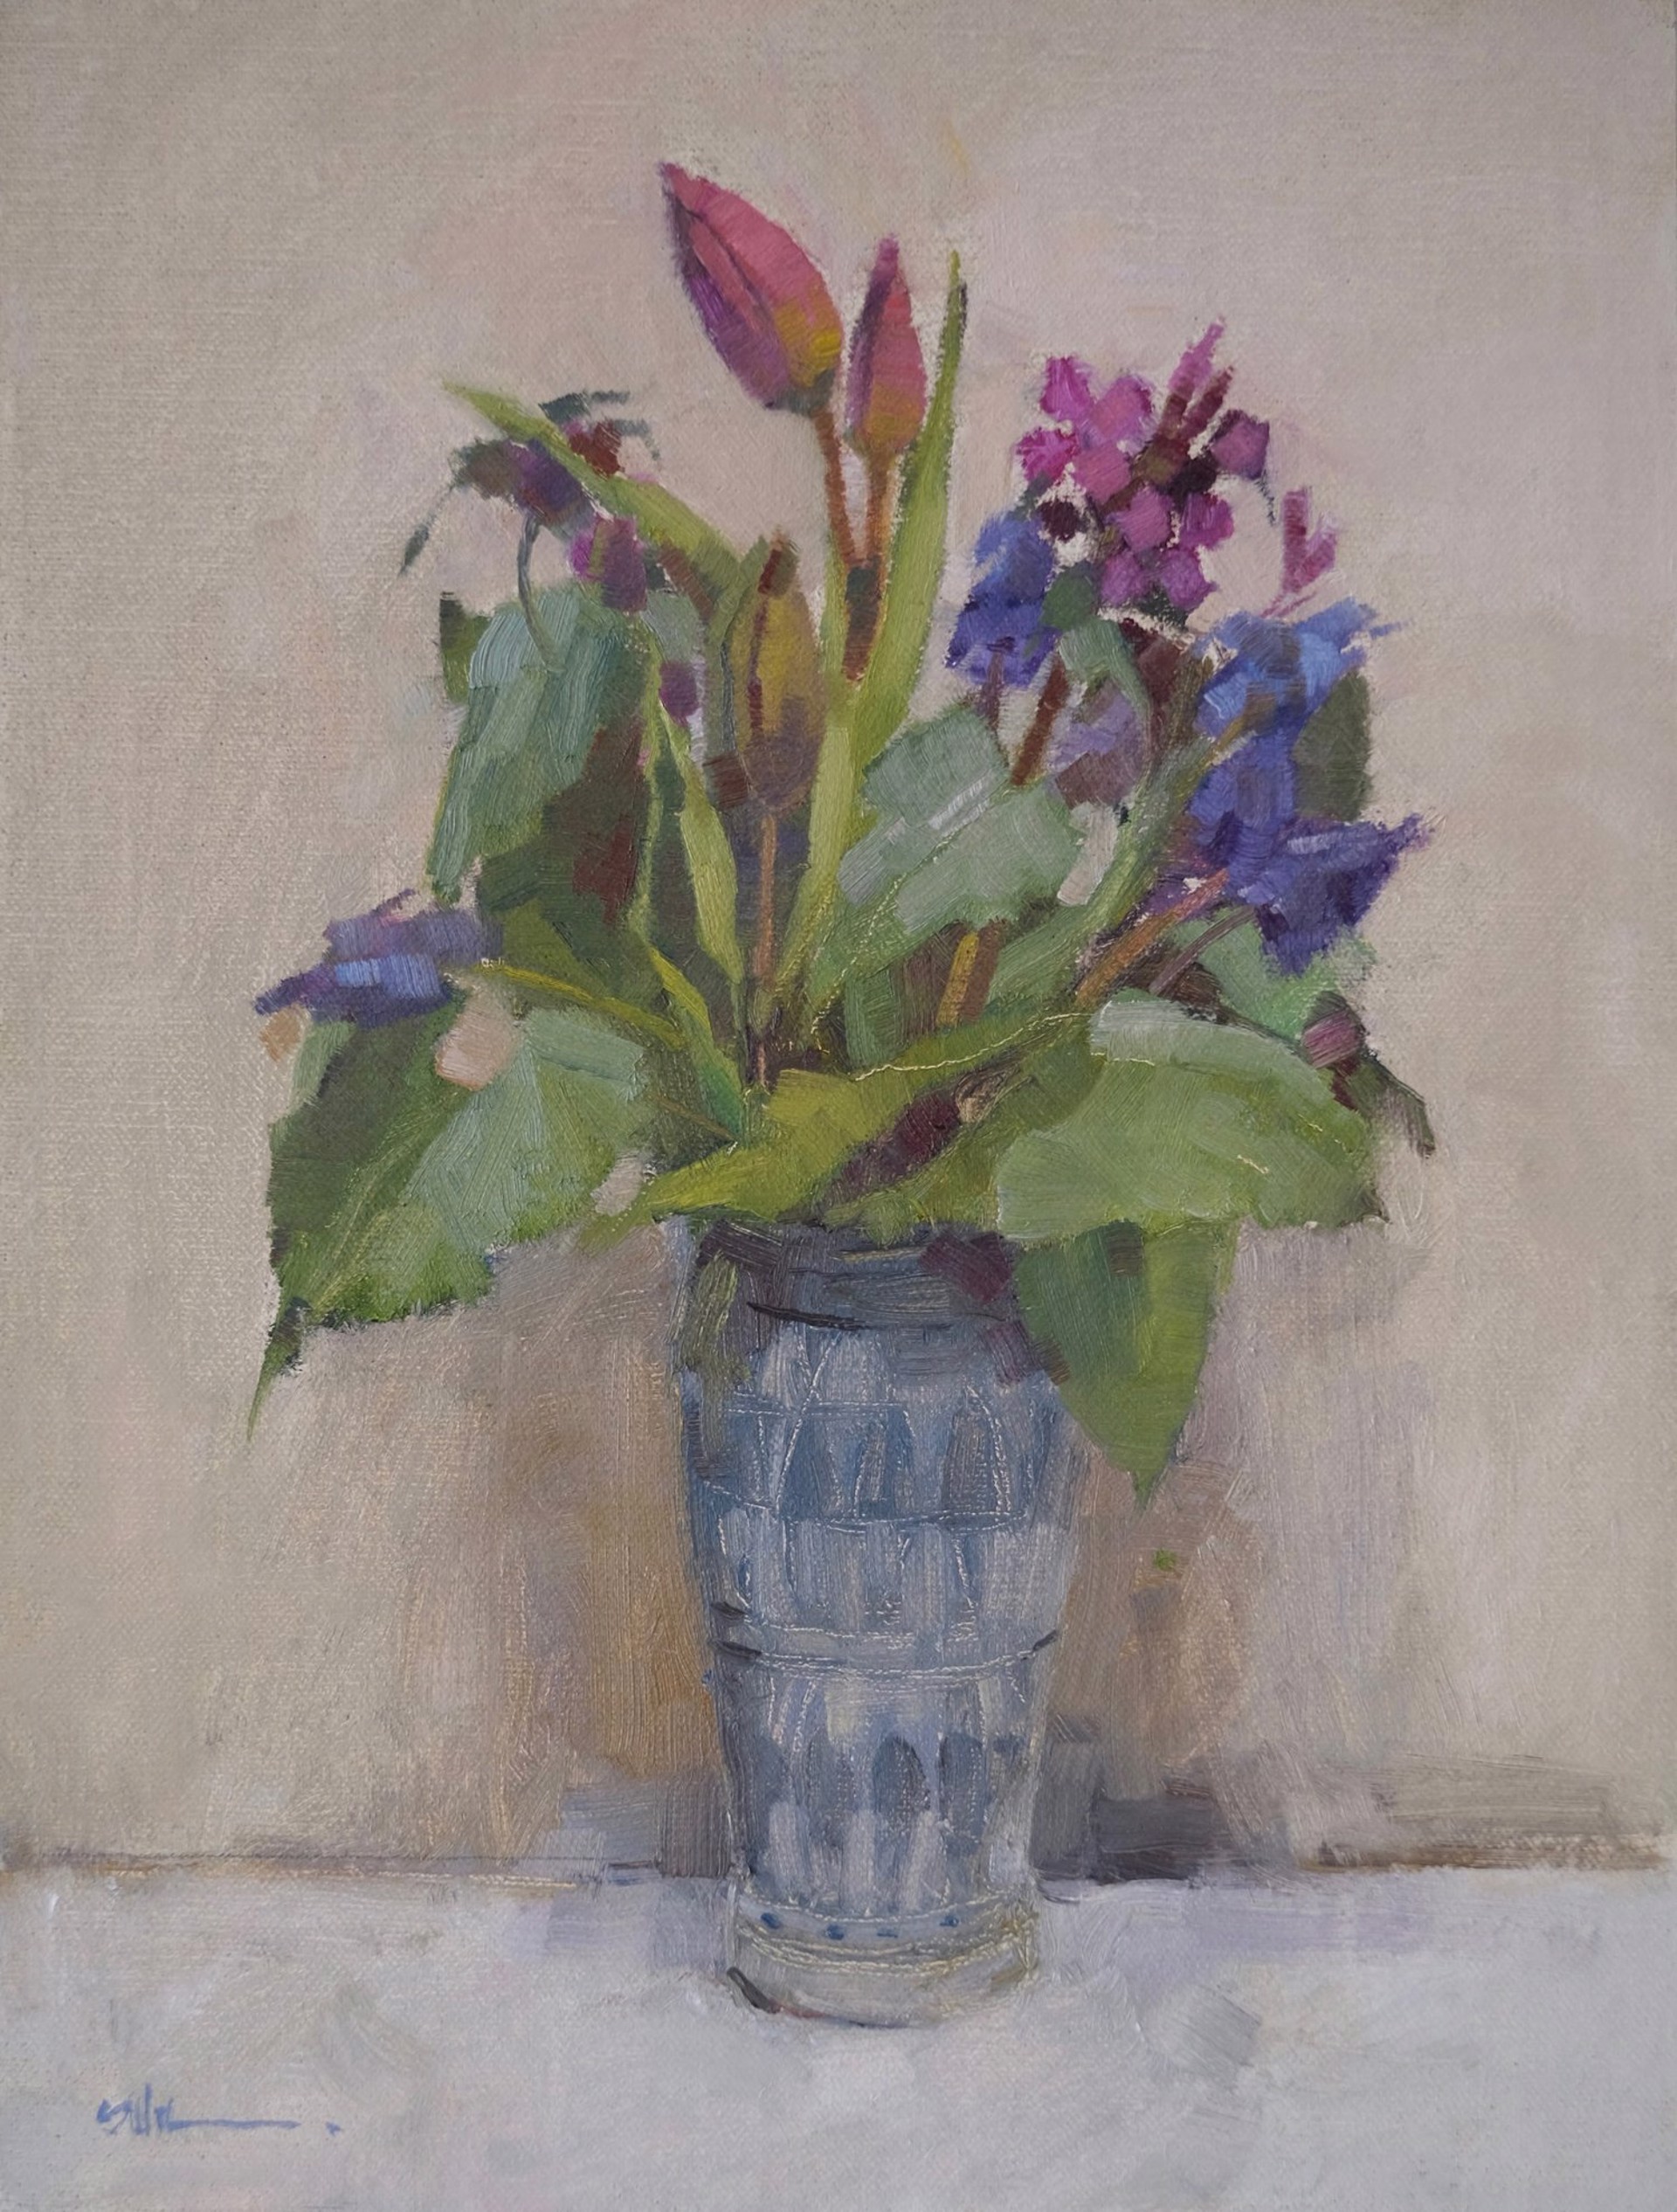 Signs of Spring by Shirley Claire Williams